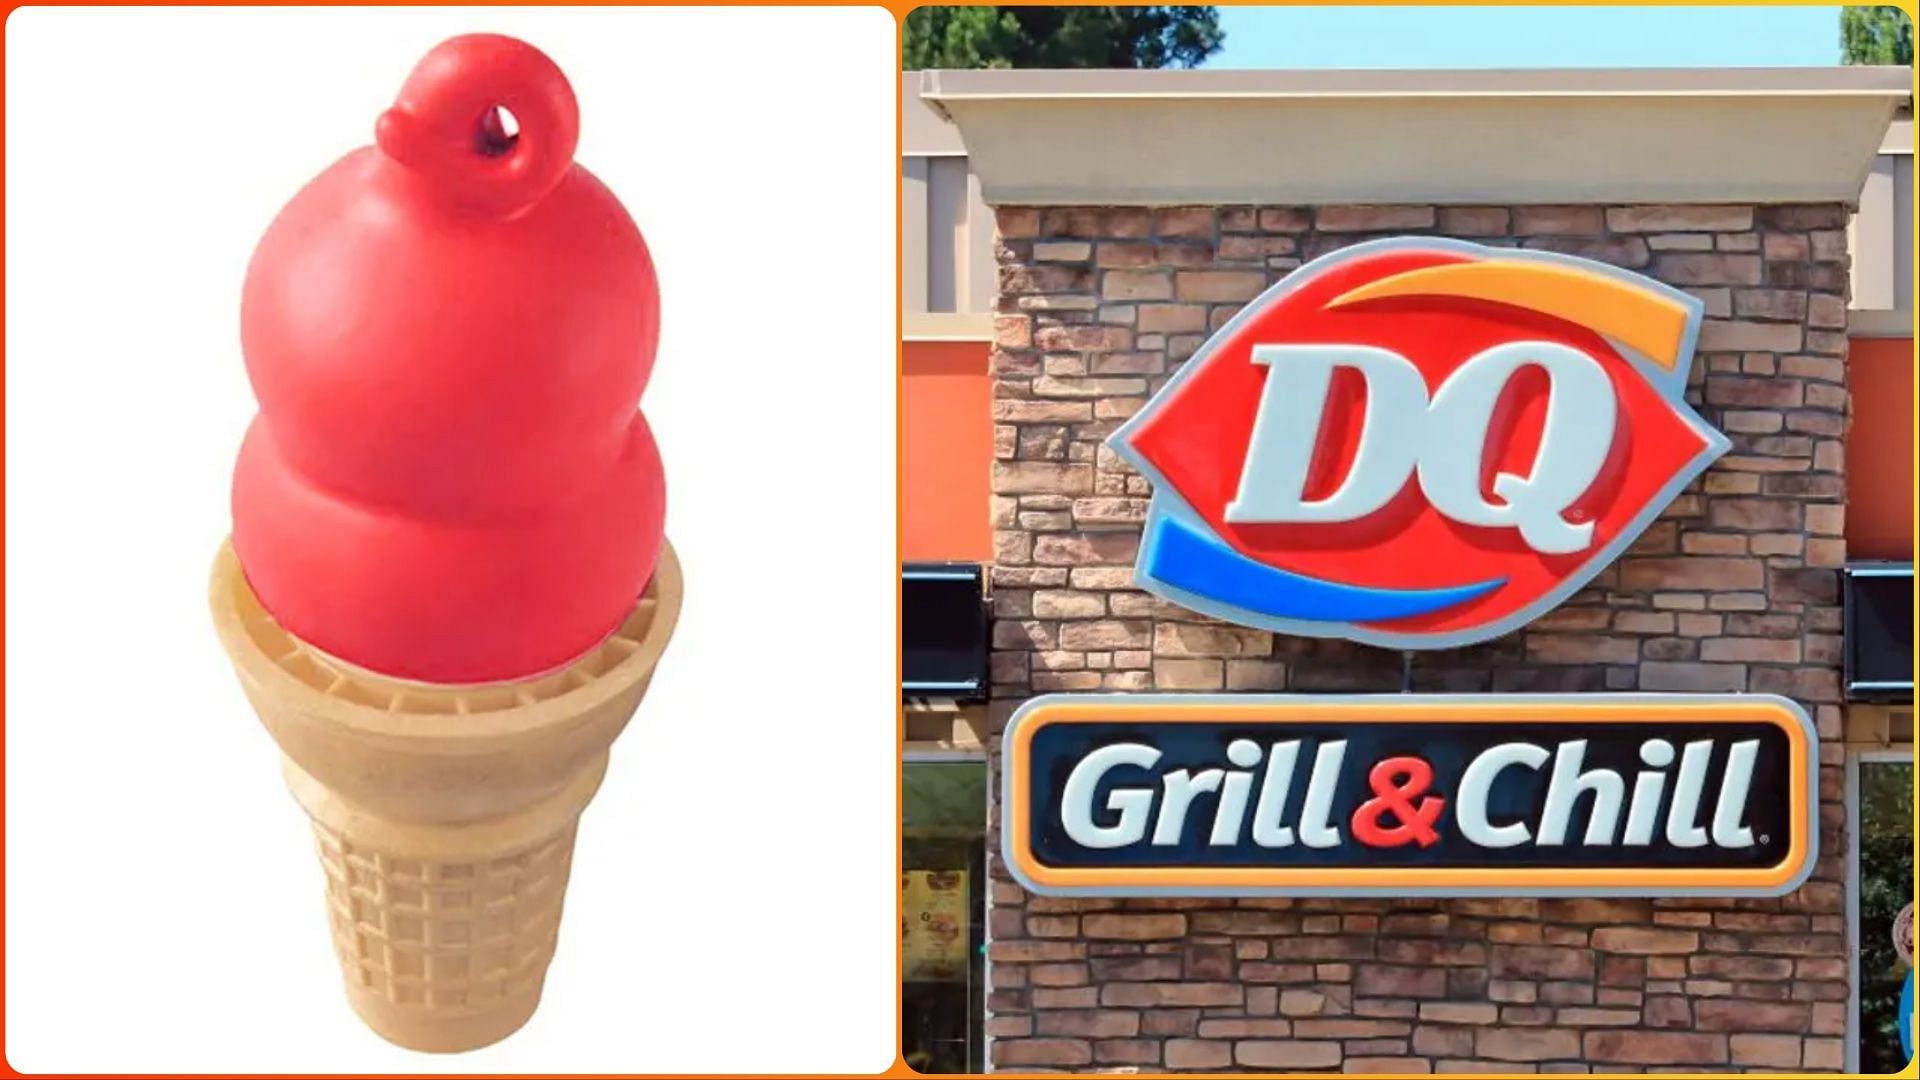 Dairy Queen announced the discontinuation of the popular Cherry-dipped cones (Image via Don &amp; Melinda Crawford/ Getty Images/ Dairy Queen)